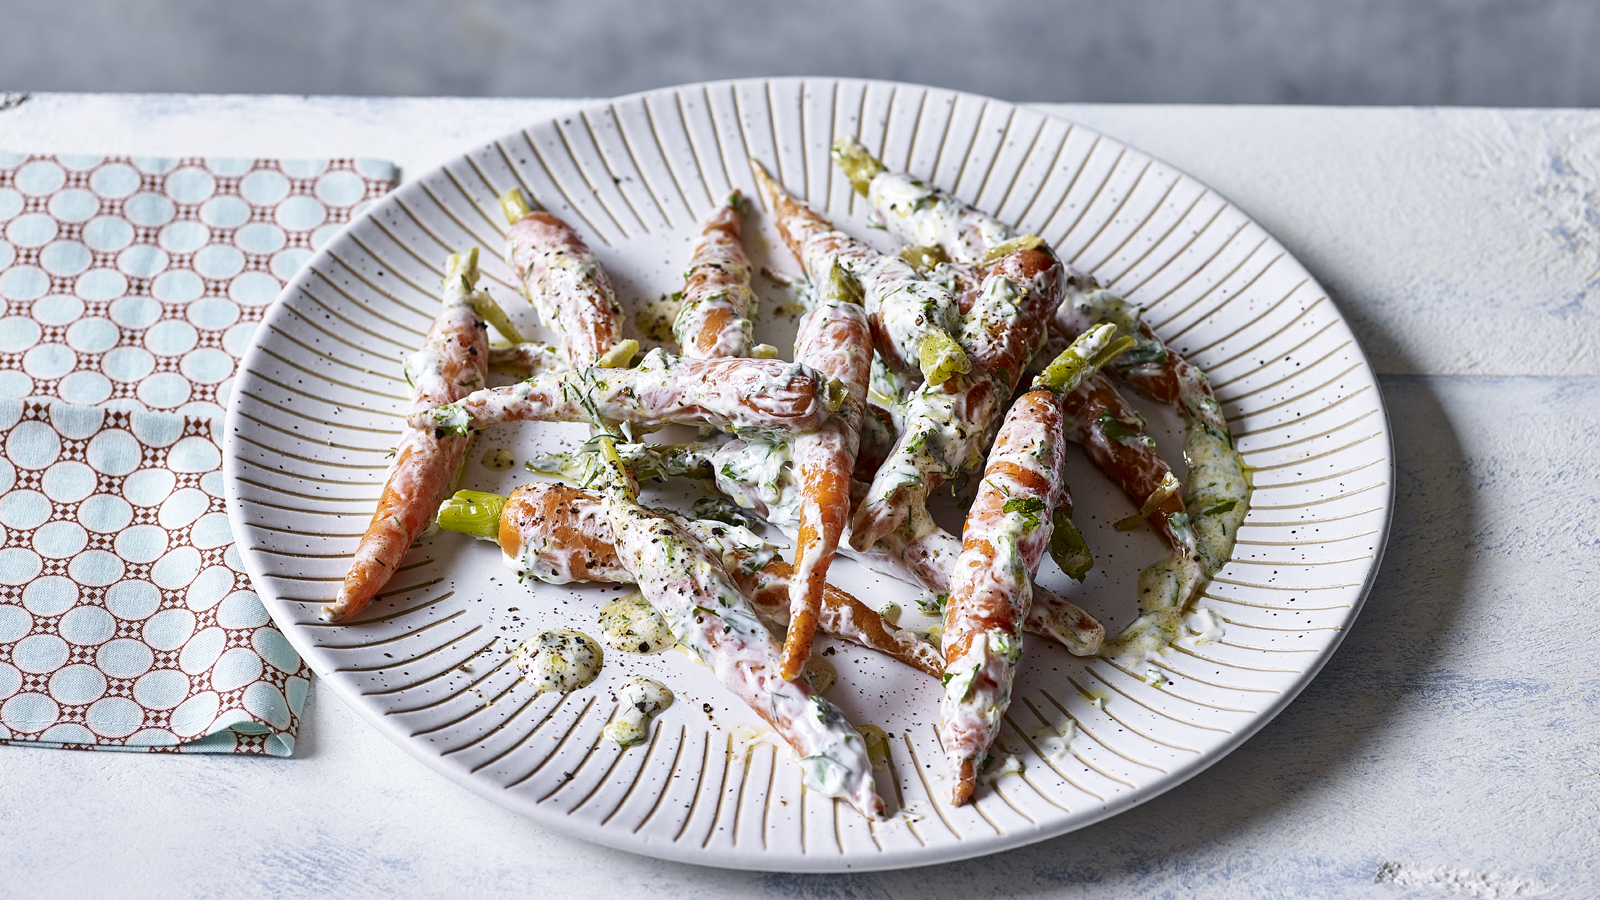 Ottolenghi's carrot salad with yoghurt recipe - BBC Food